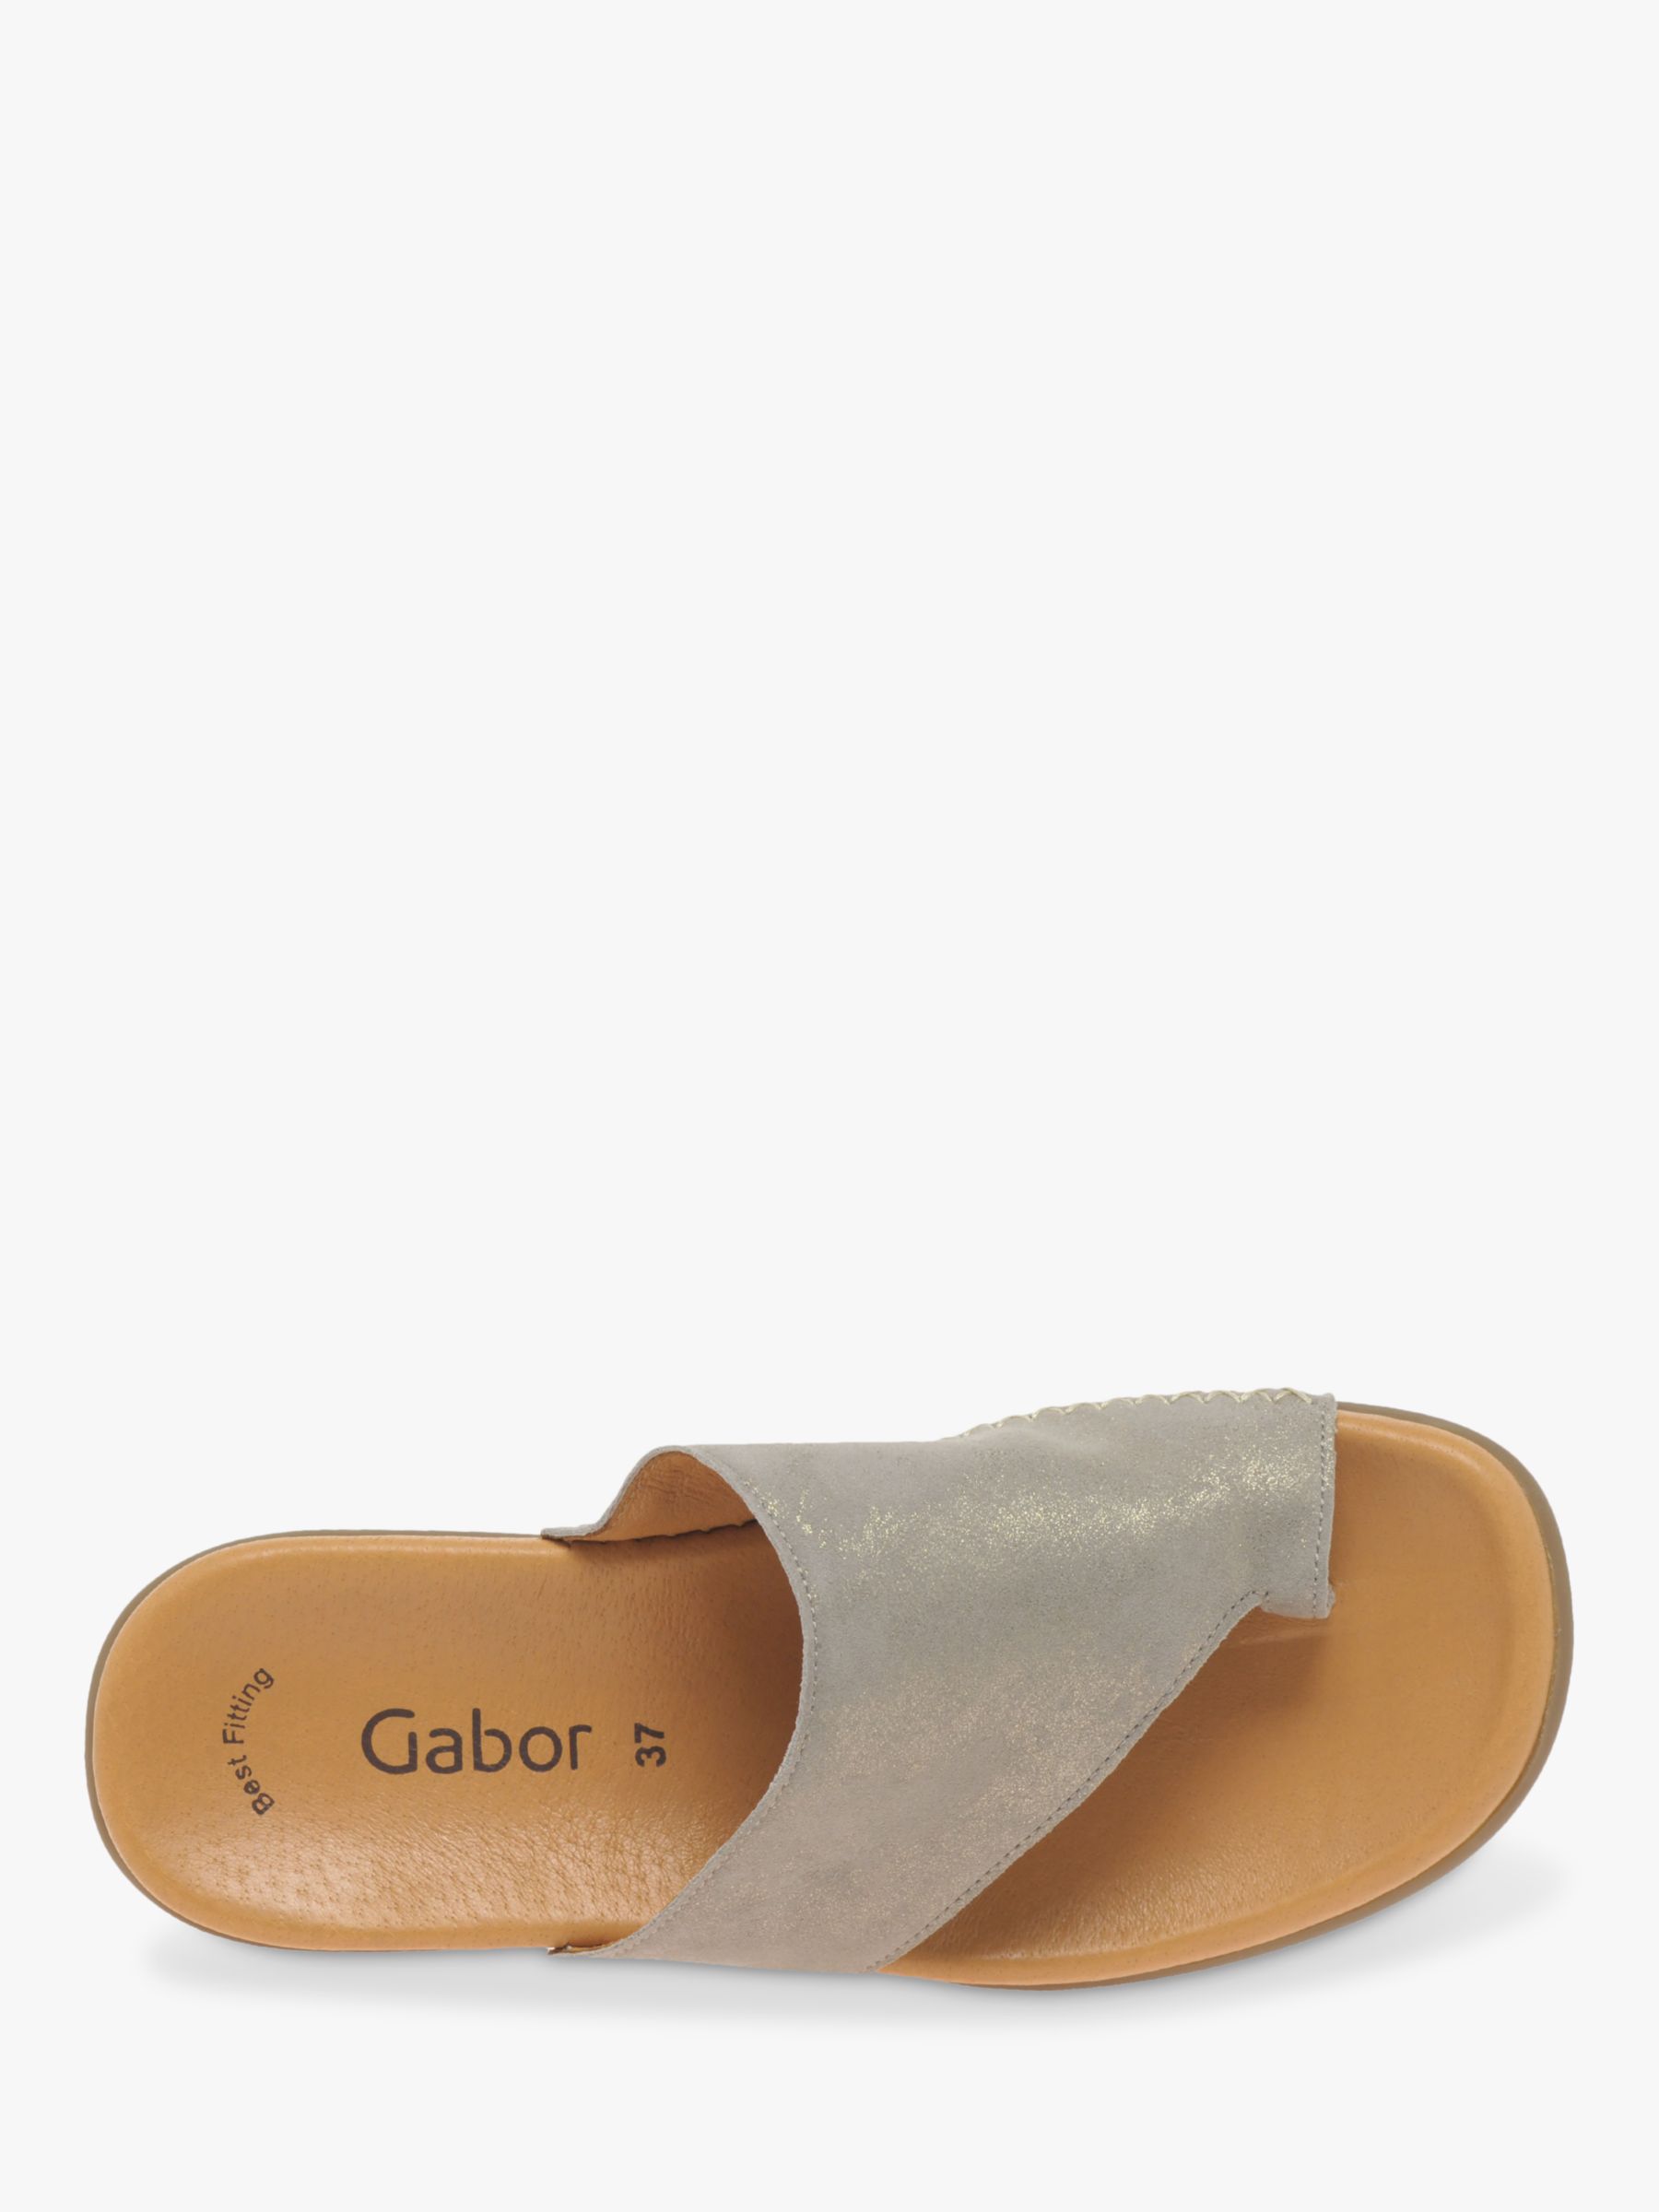 Gabor Lanzarote Leather Mule Sandals, Neutral at John Lewis &